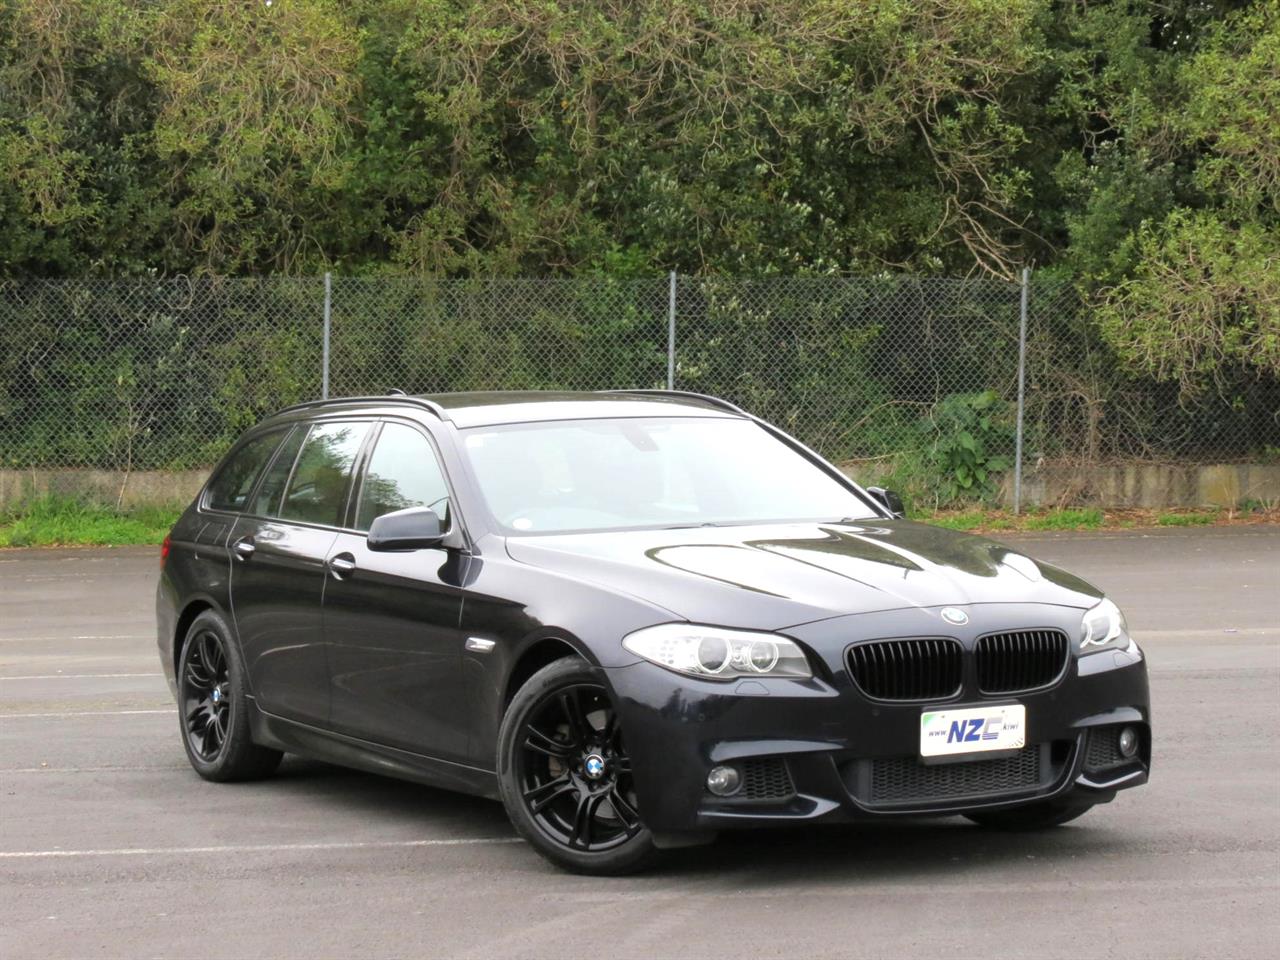 NZC best hot price for 2012 BMW 523I in Auckland